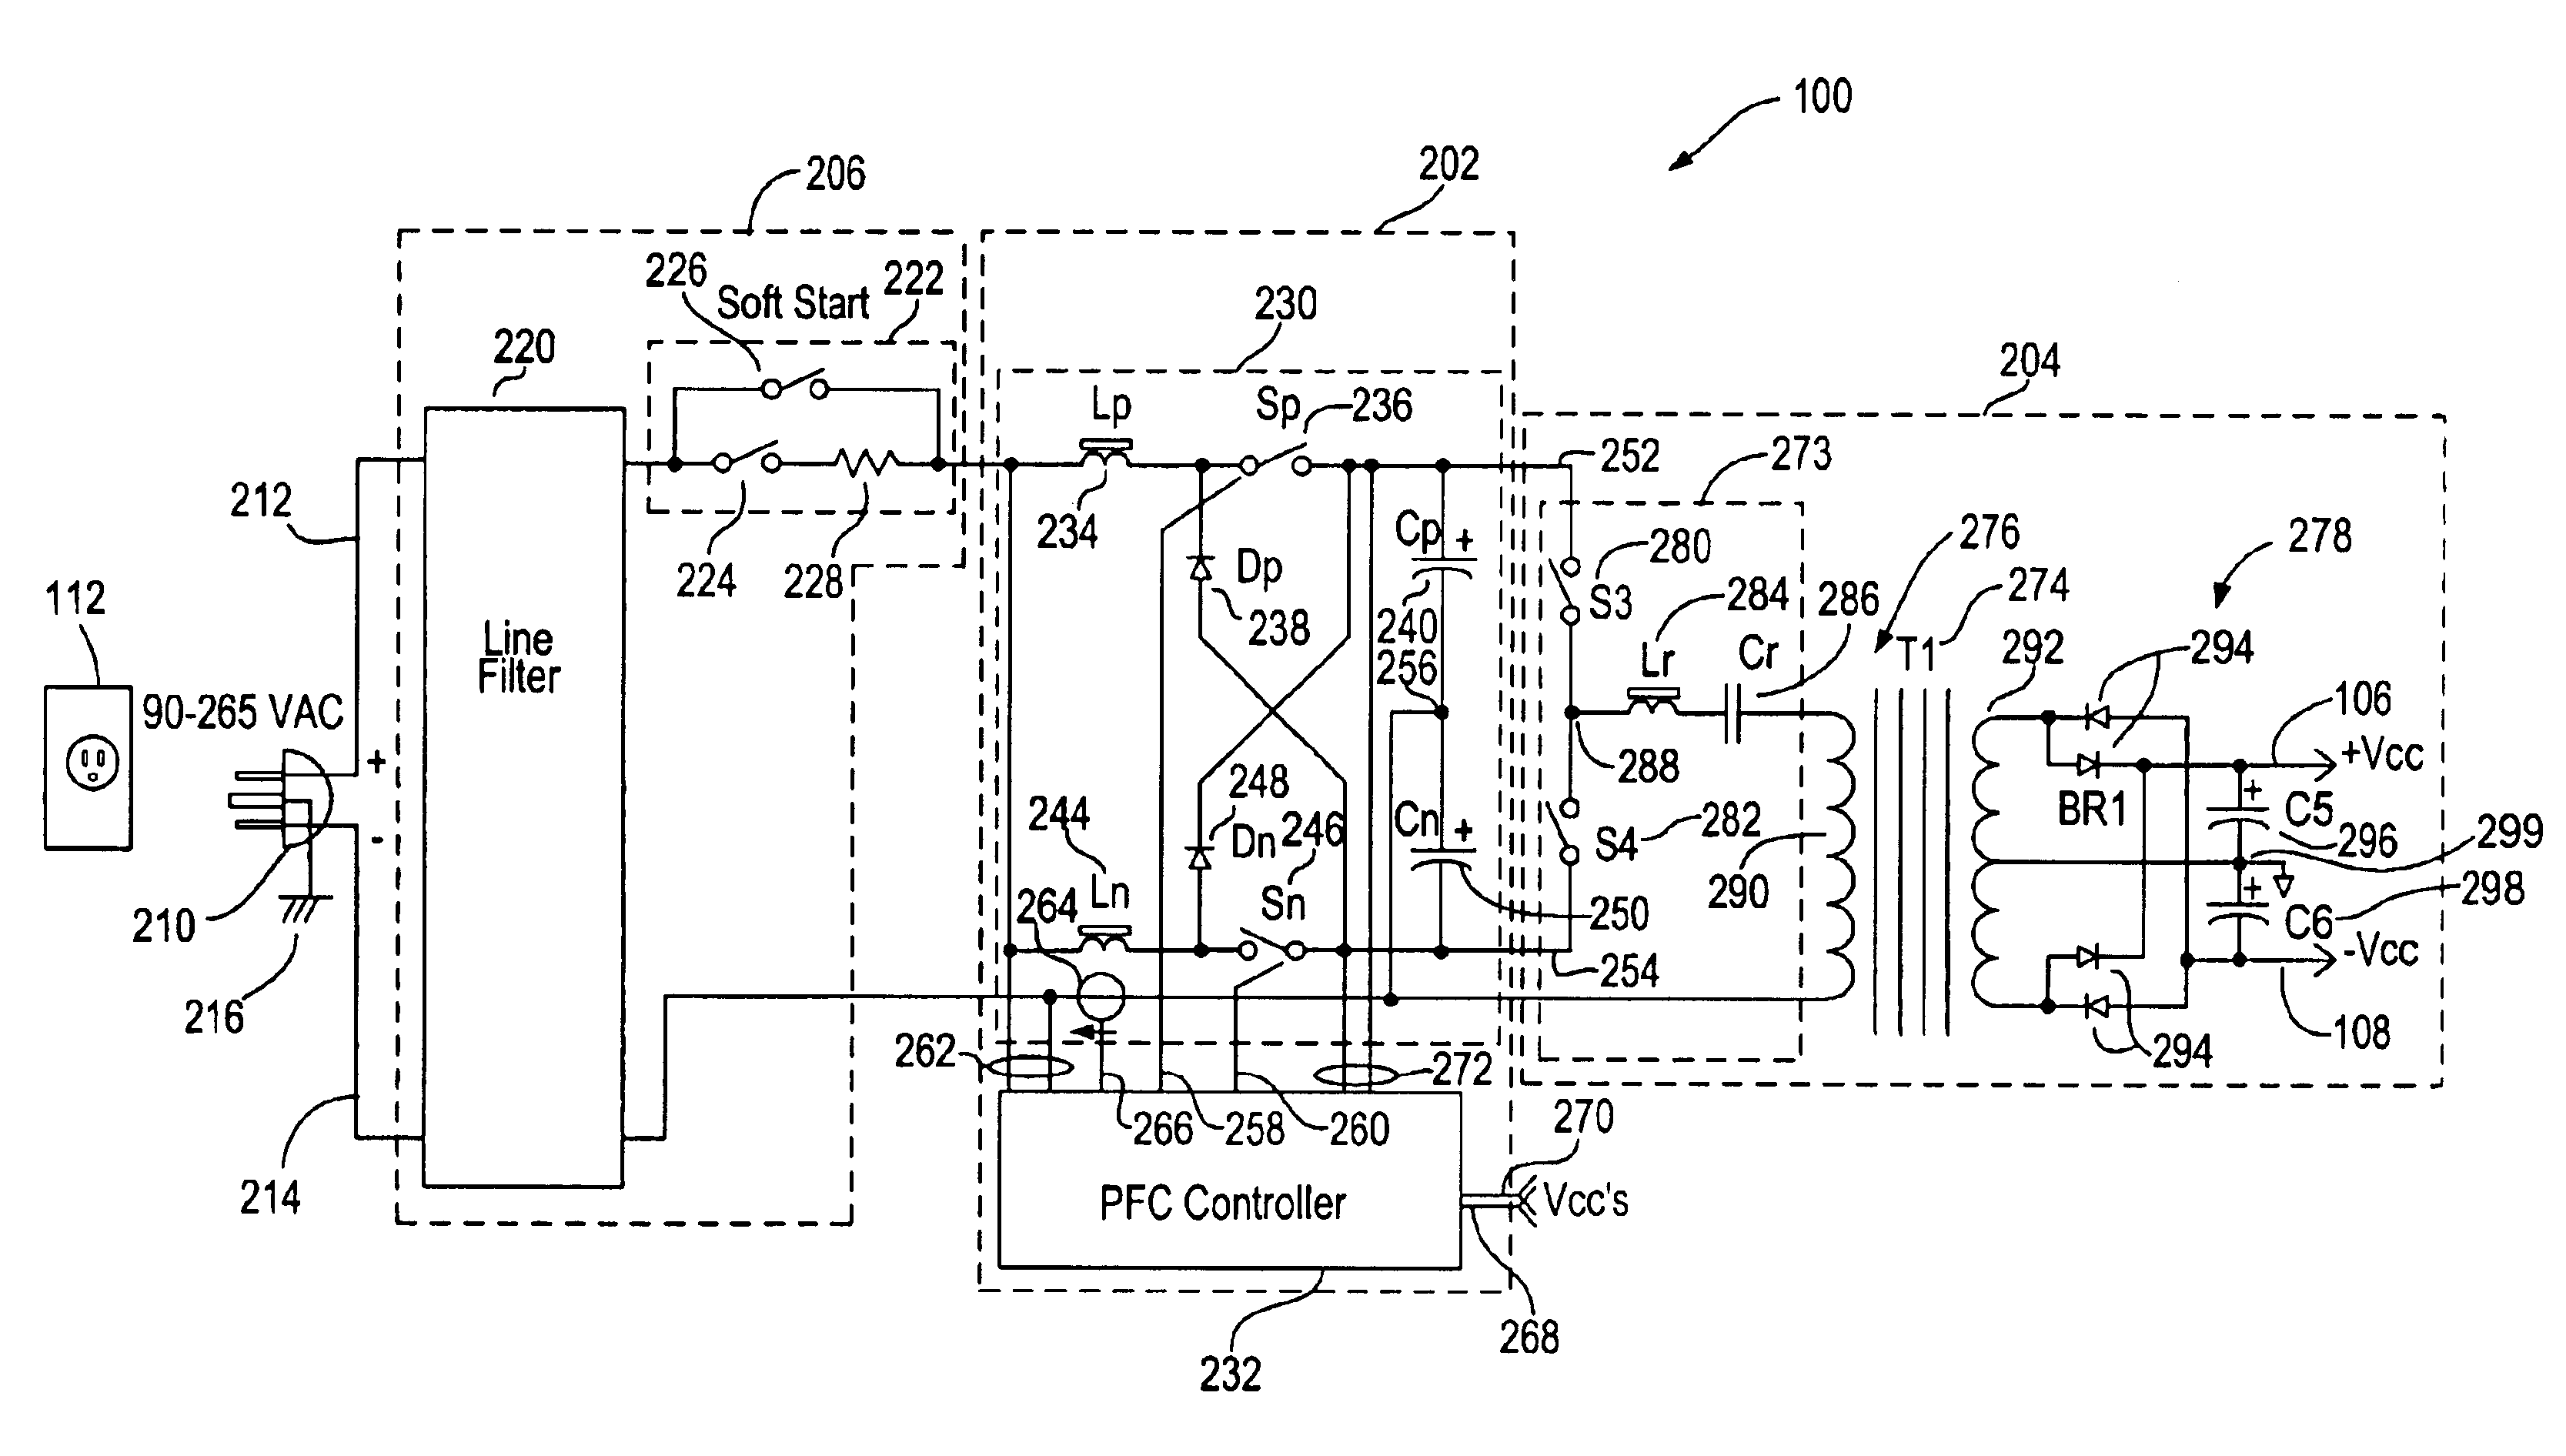 Opposed current converter power factor correcting power supply